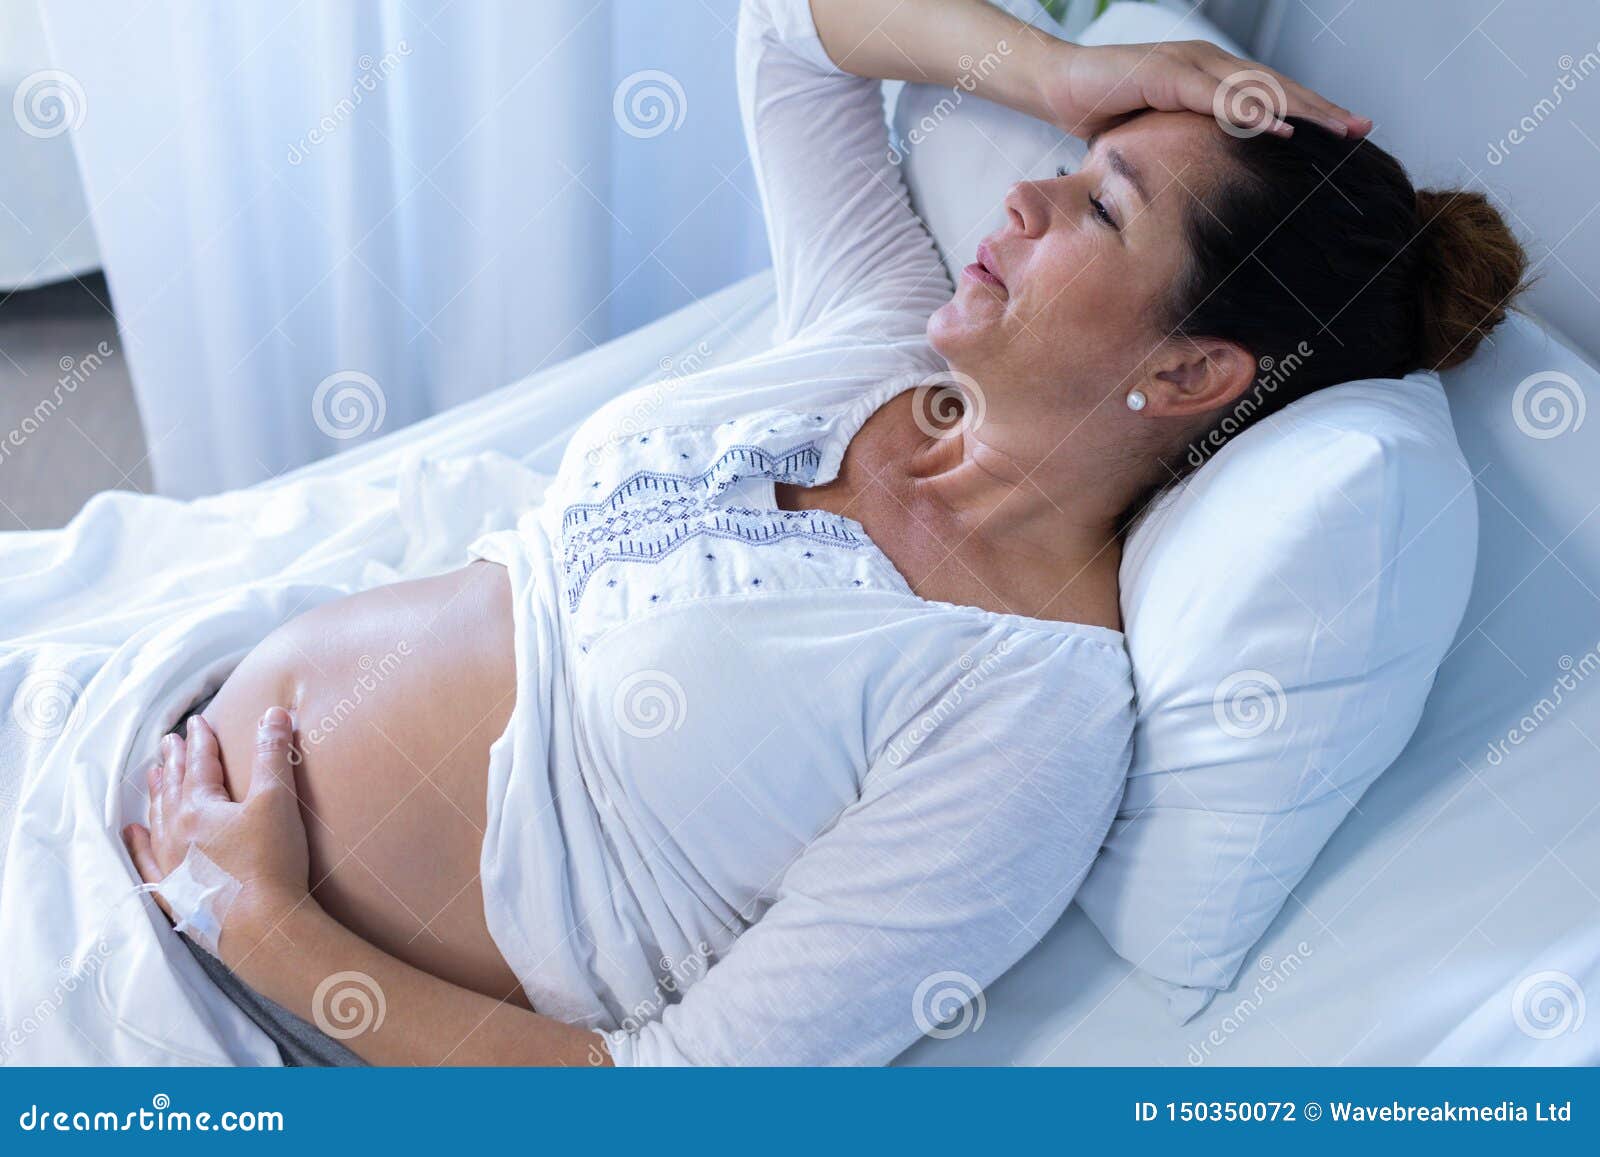 Pregnant Woman Suffering From Pain While Touching Her Belly I